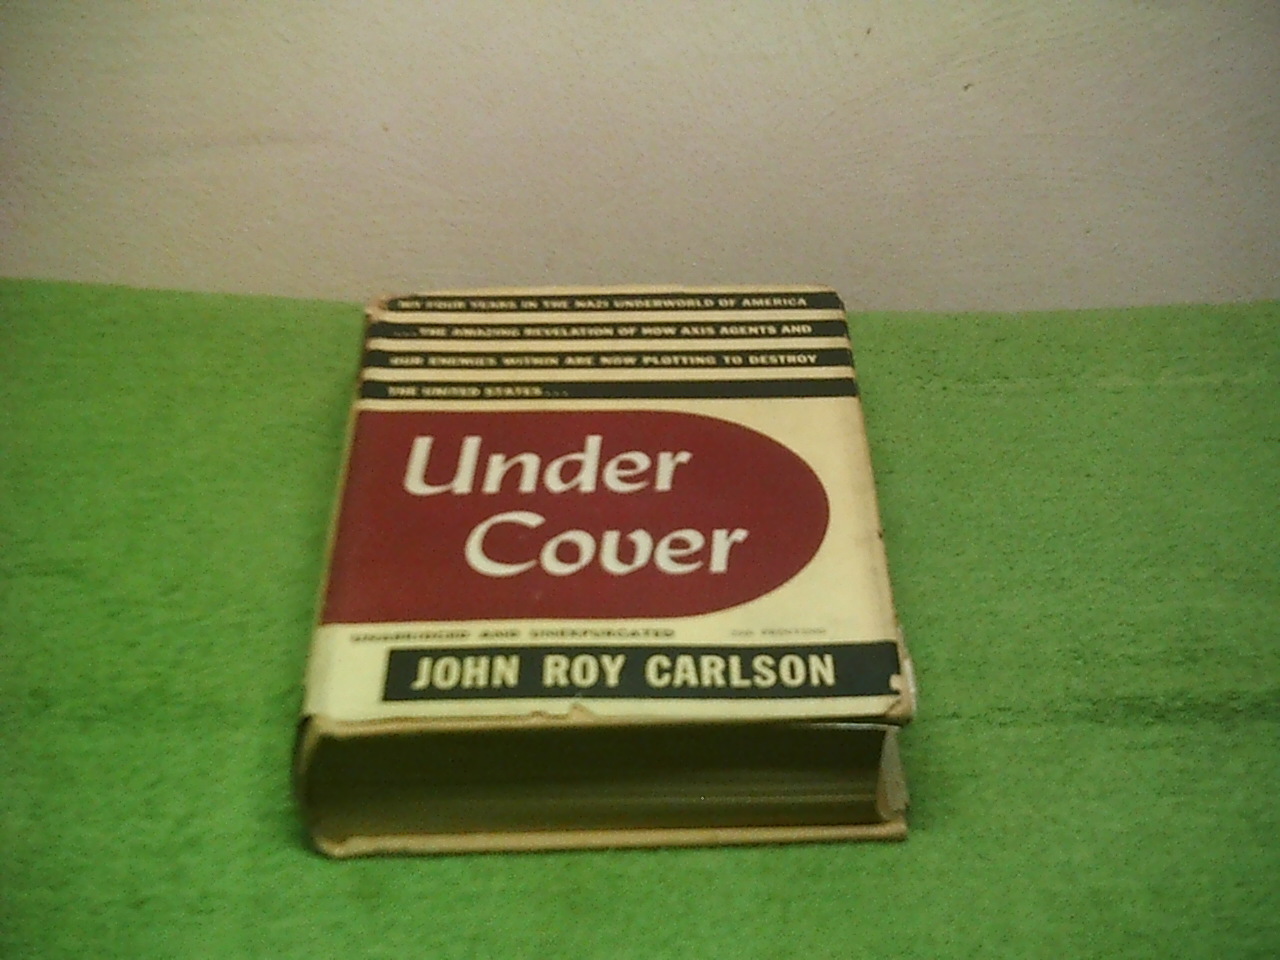 Primary image for Vintage 1943 Under Cover by John Roy Carlson Hardcover Book First Edition